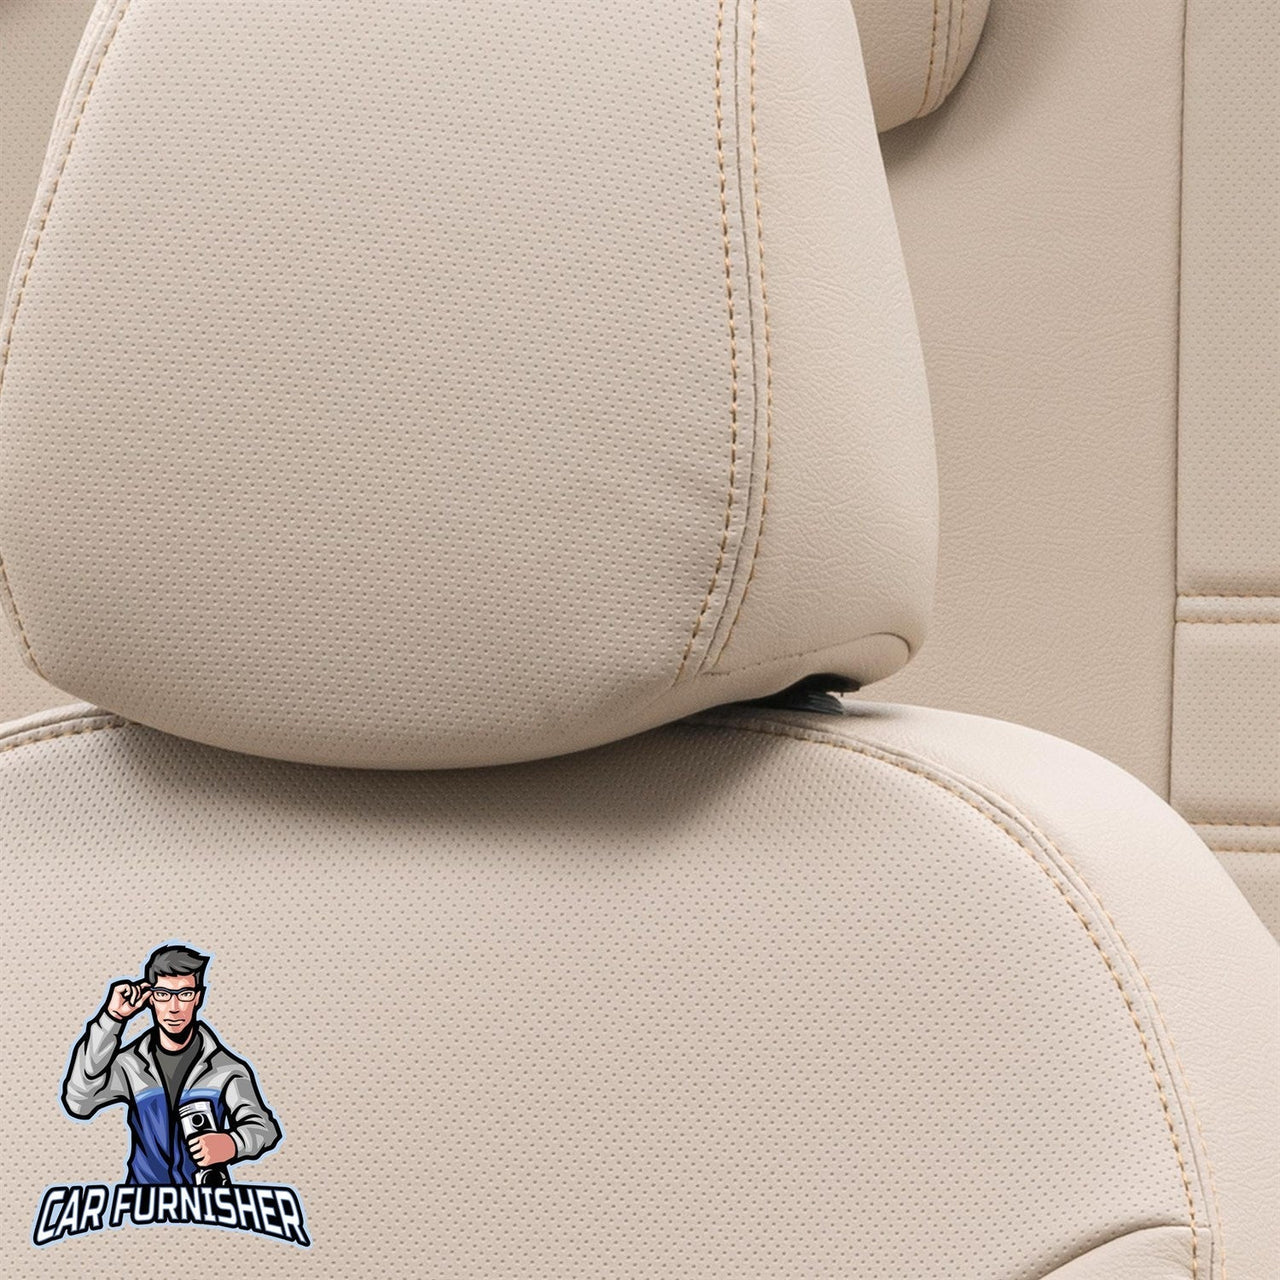 Volvo V70 Seat Cover Istanbul Leather Design Beige Leather